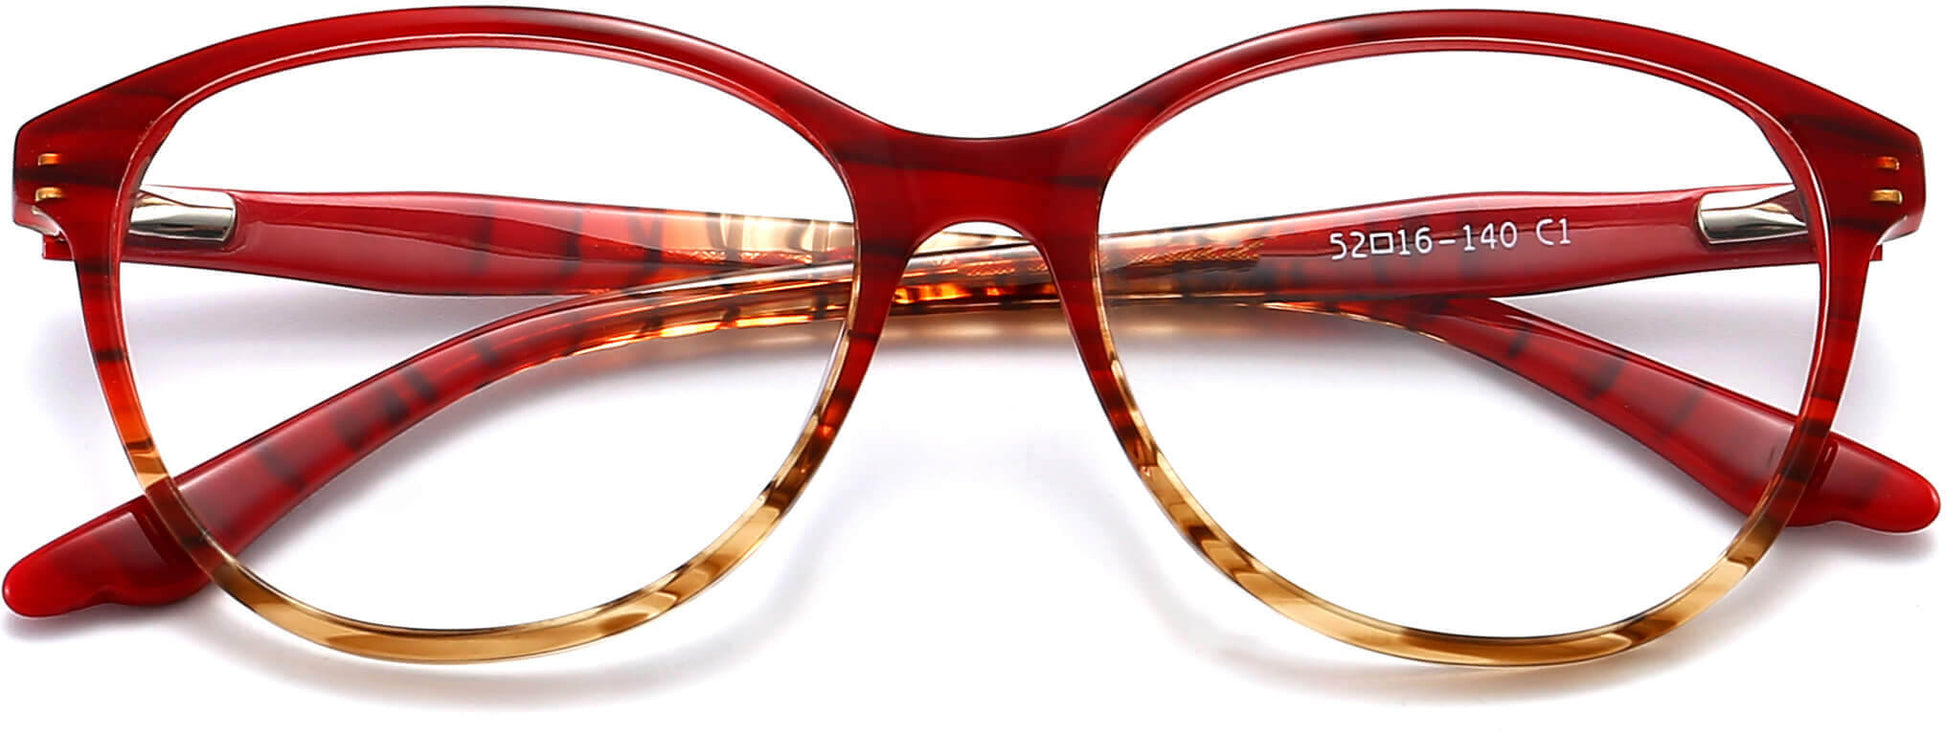 volcanis red Eyeglasses from ANRRI, closed view